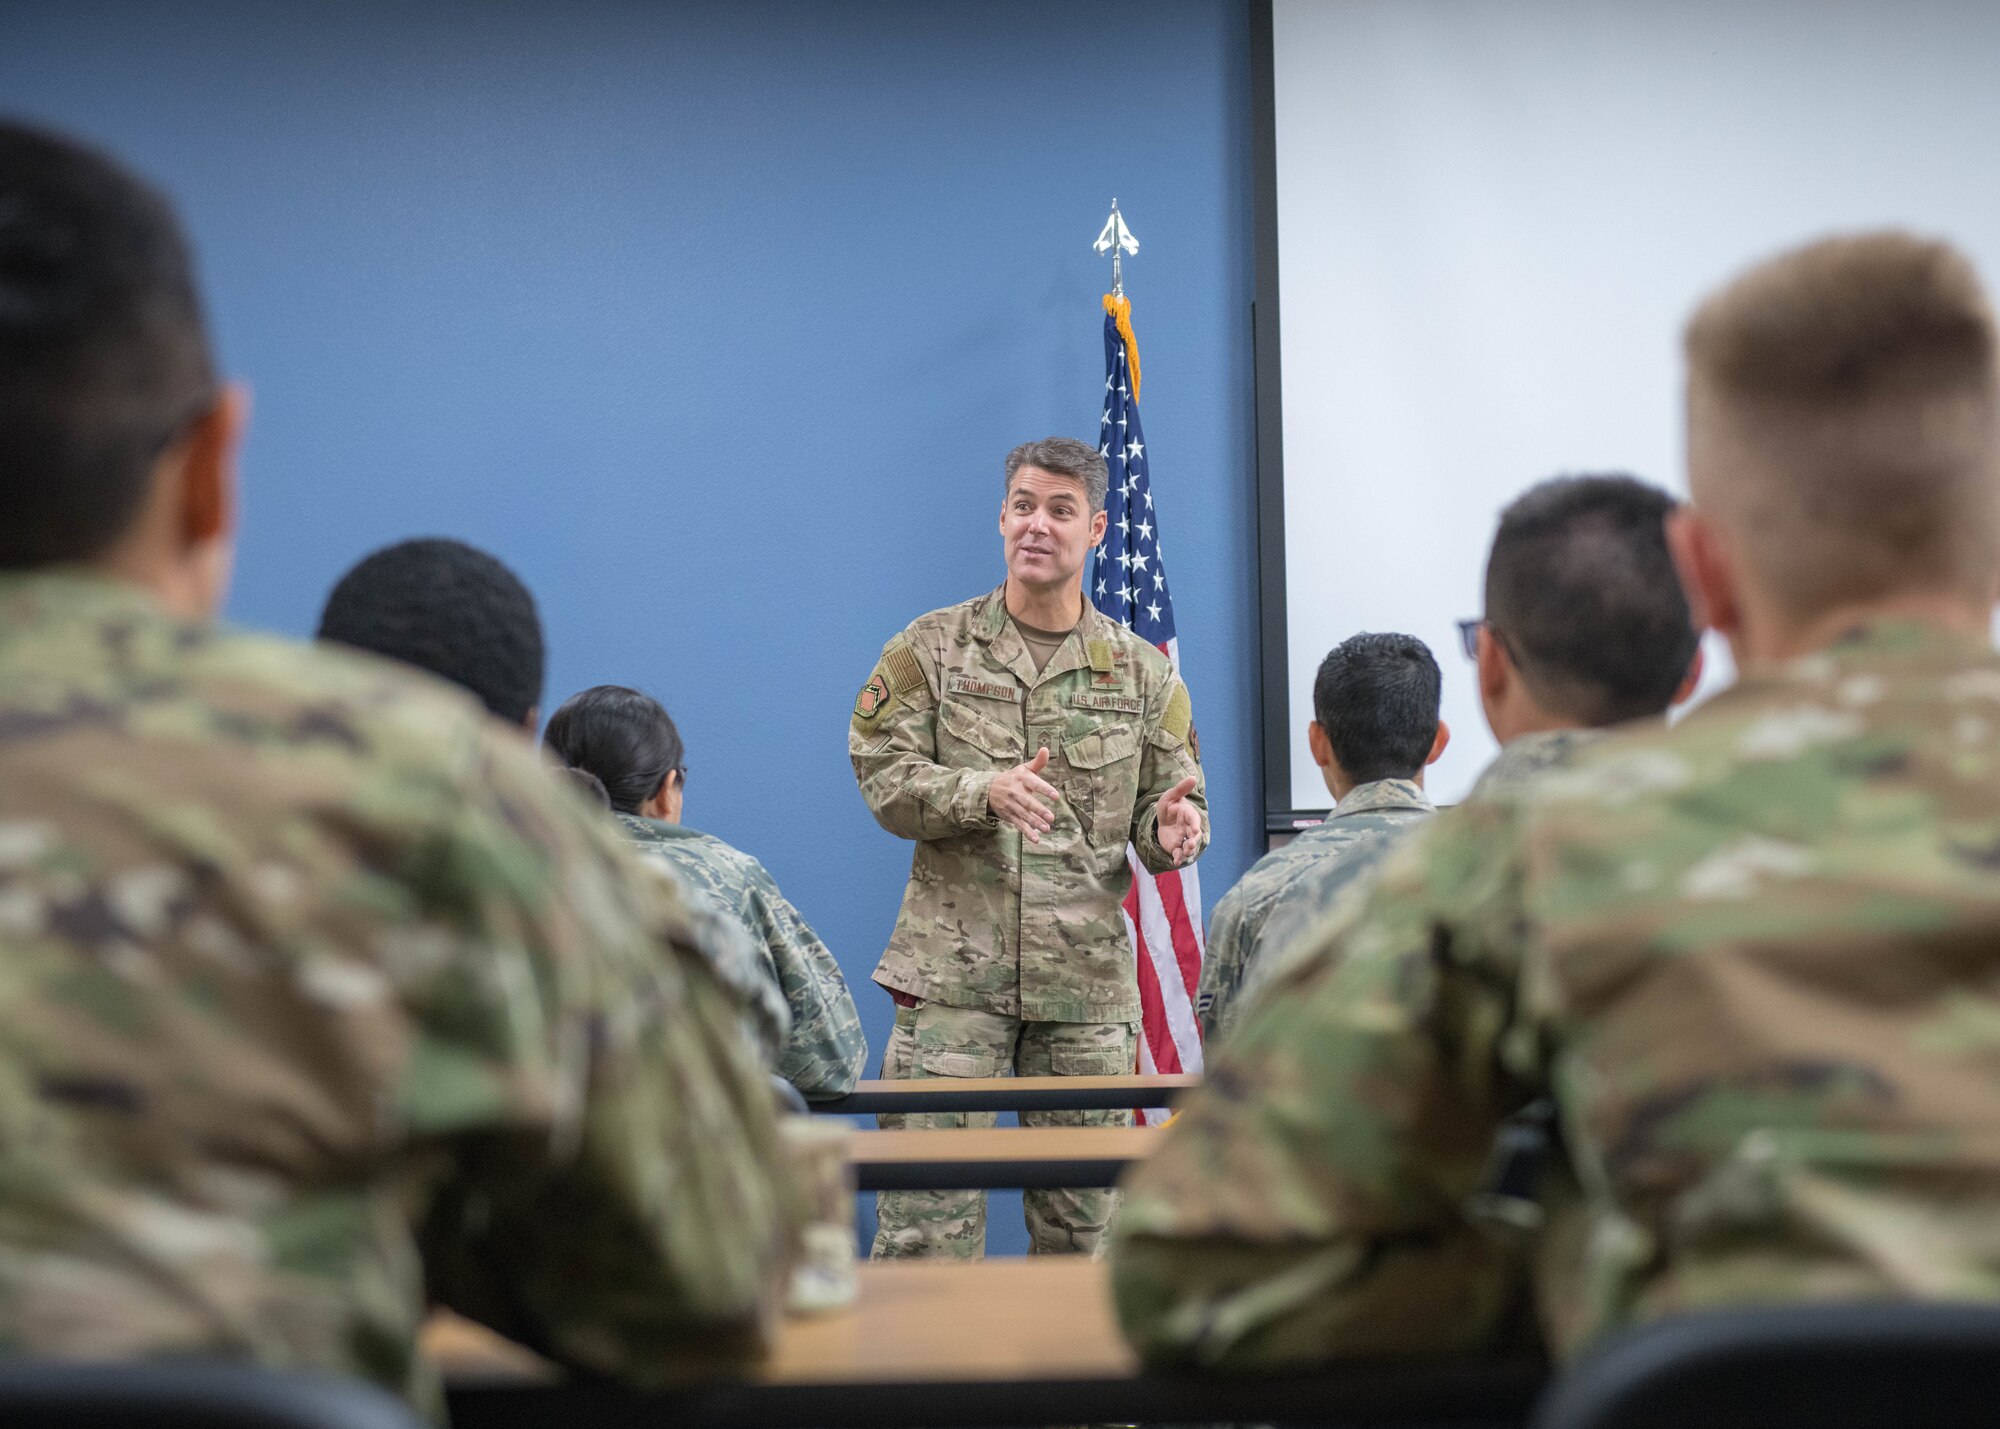 Command chief informs Airmen on their role in the mission